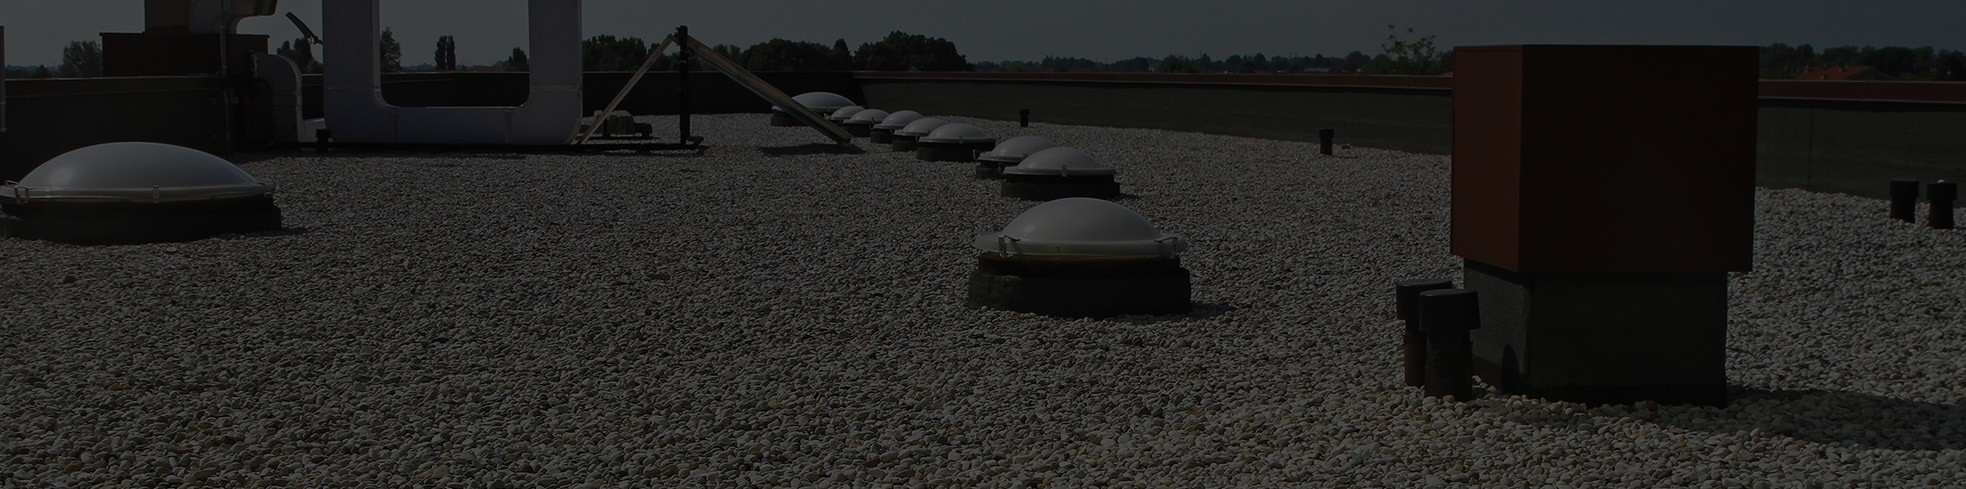 Gravel roofing construction & repair services in Milwaukee, WI 